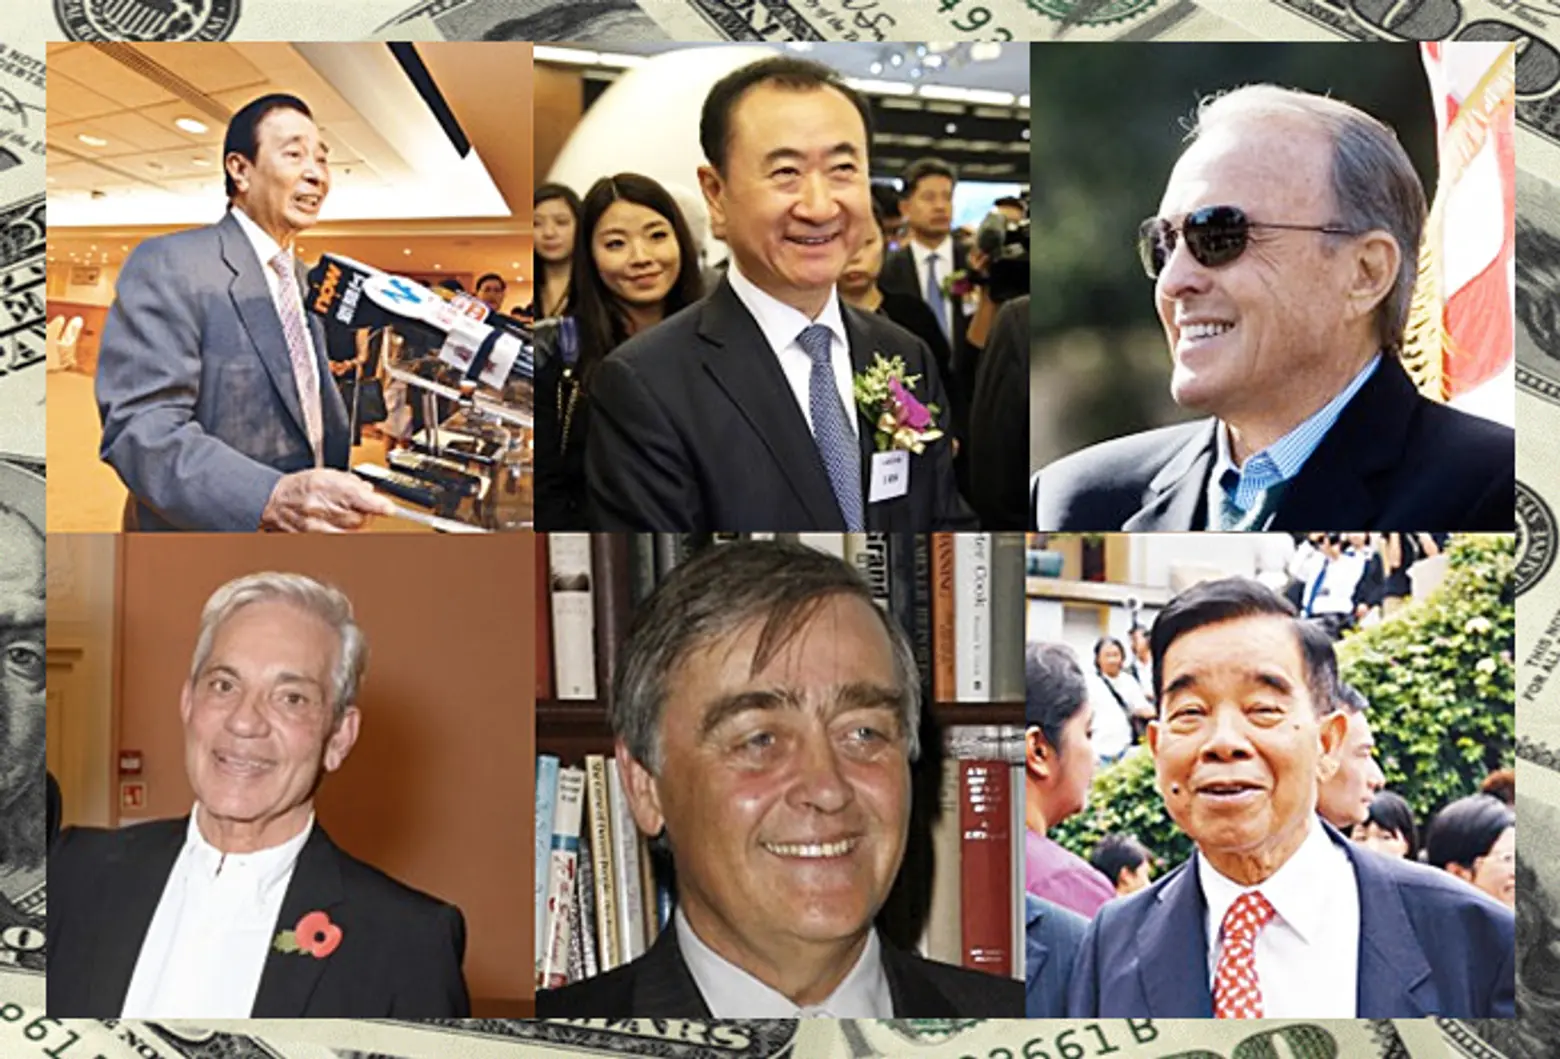 Forbes Tallies the World’s Richest Real Estate Tycoons